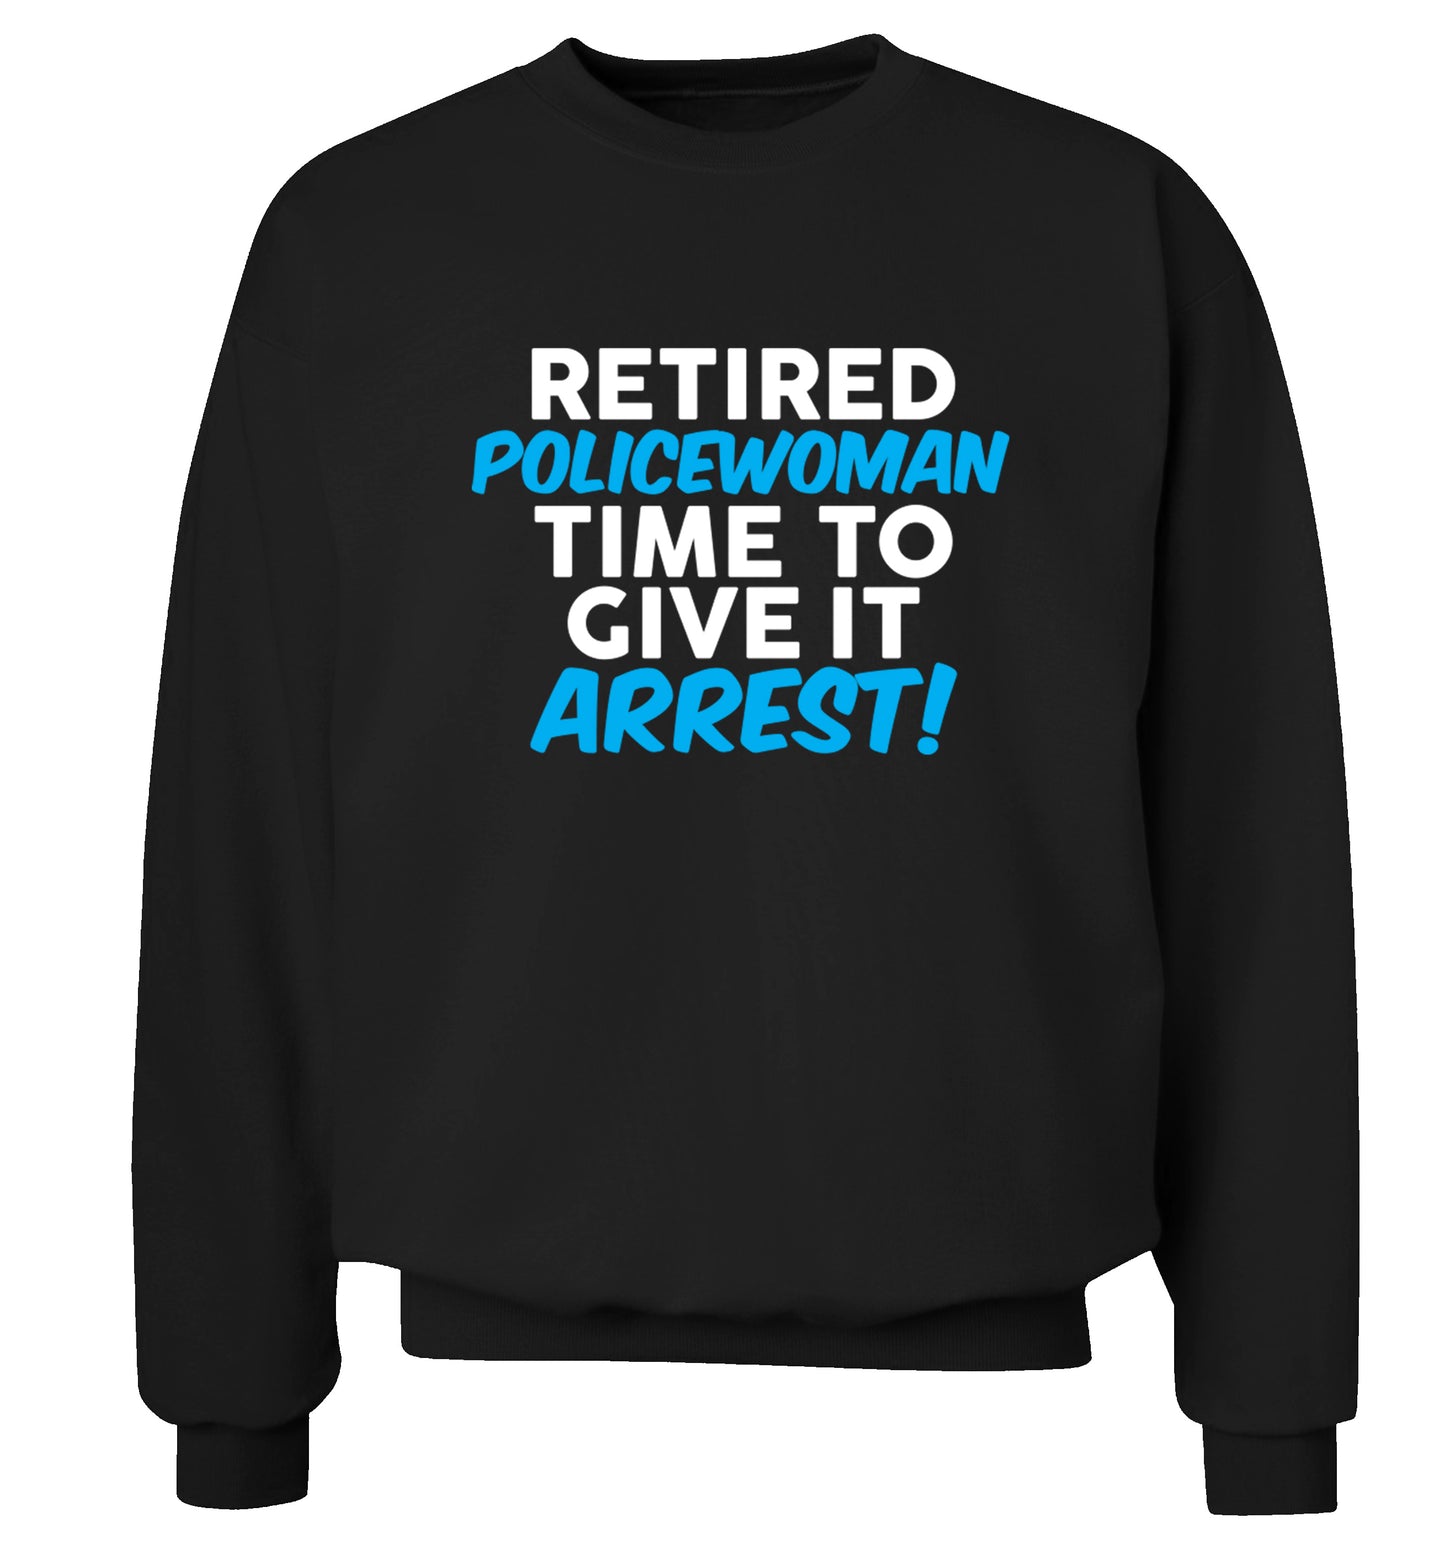 Retired policewoman time to give it arrest Adult's unisex black Sweater 2XL